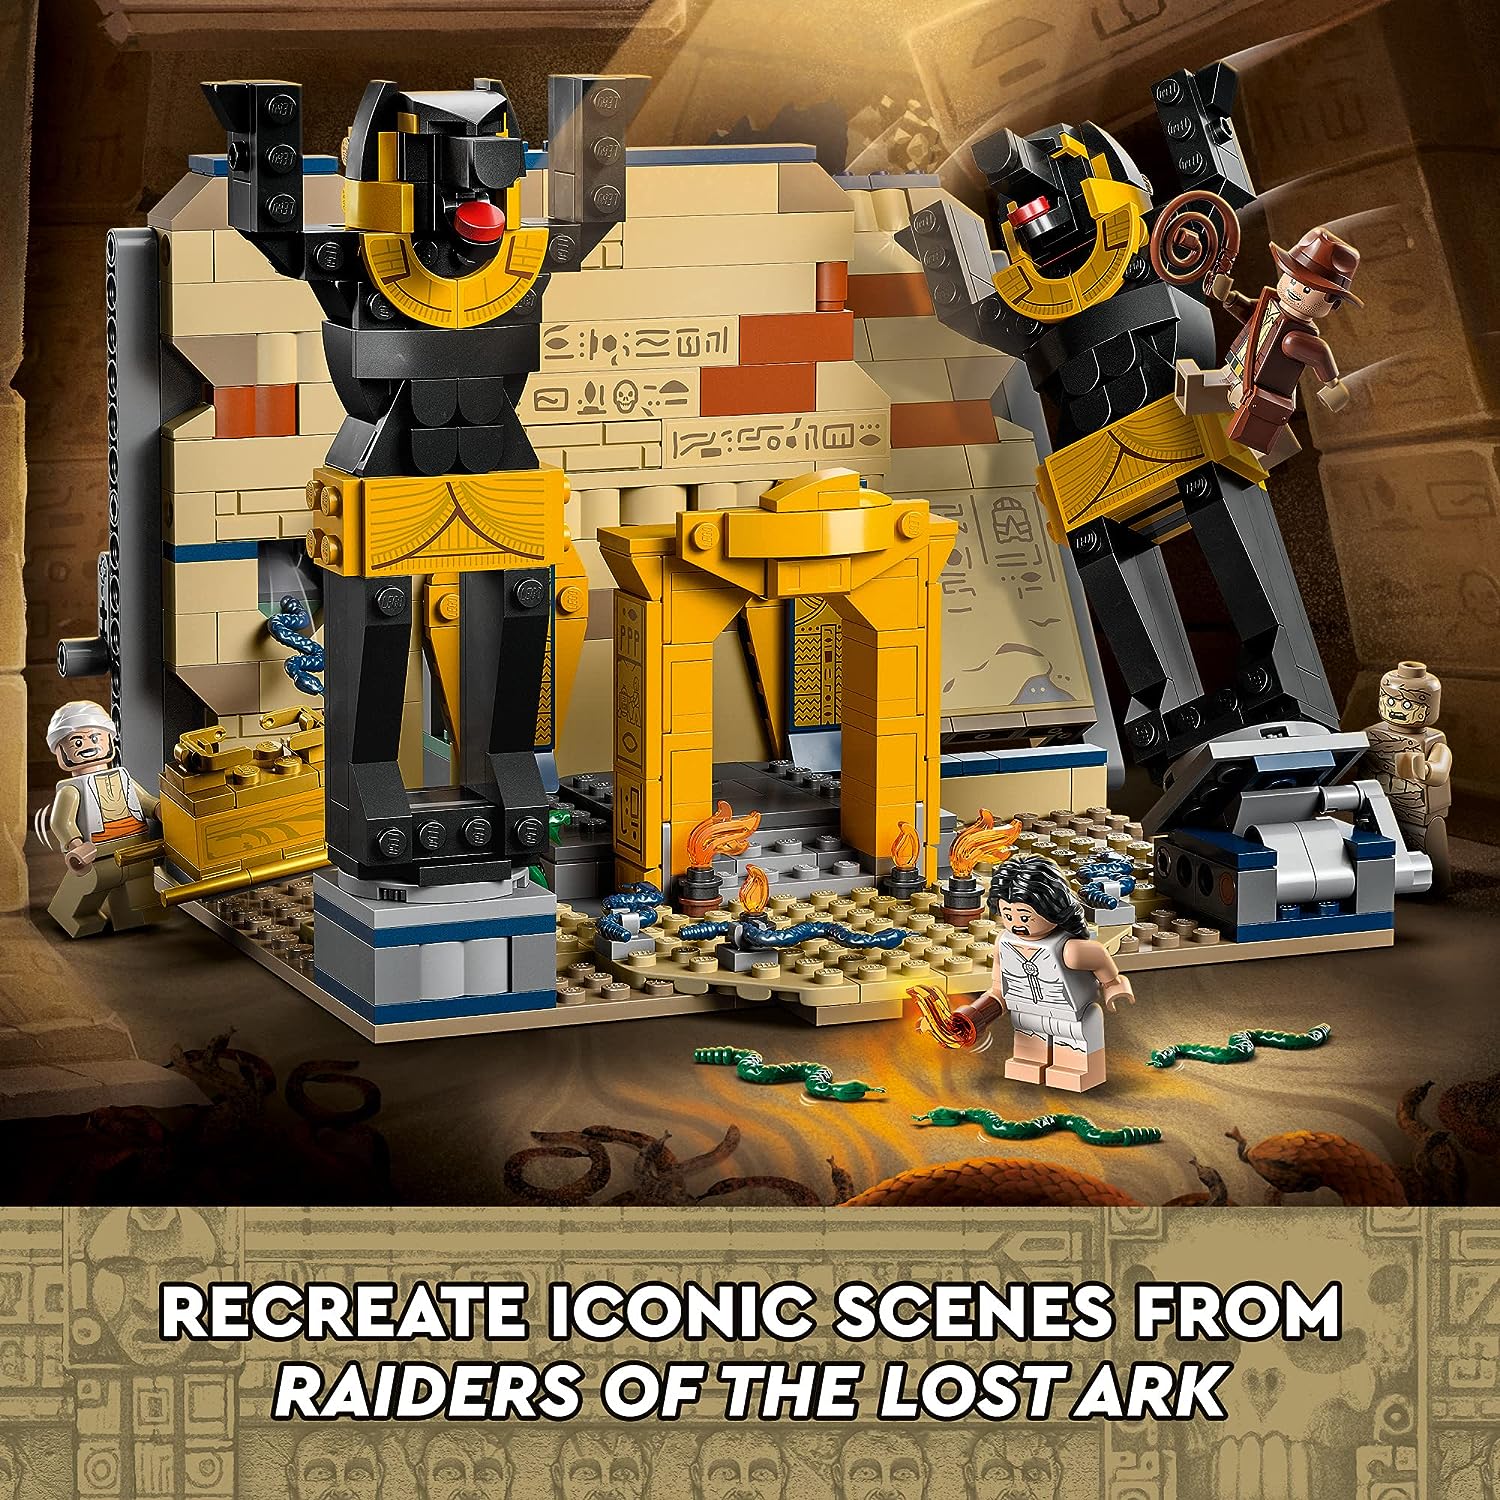 LEGO Indiana Jones Escape from The Lost Tomb 77013 Building Toy, Featuring a Mummy and an Indiana Jones Minifigure from Raiders of The Lost Ark Movie